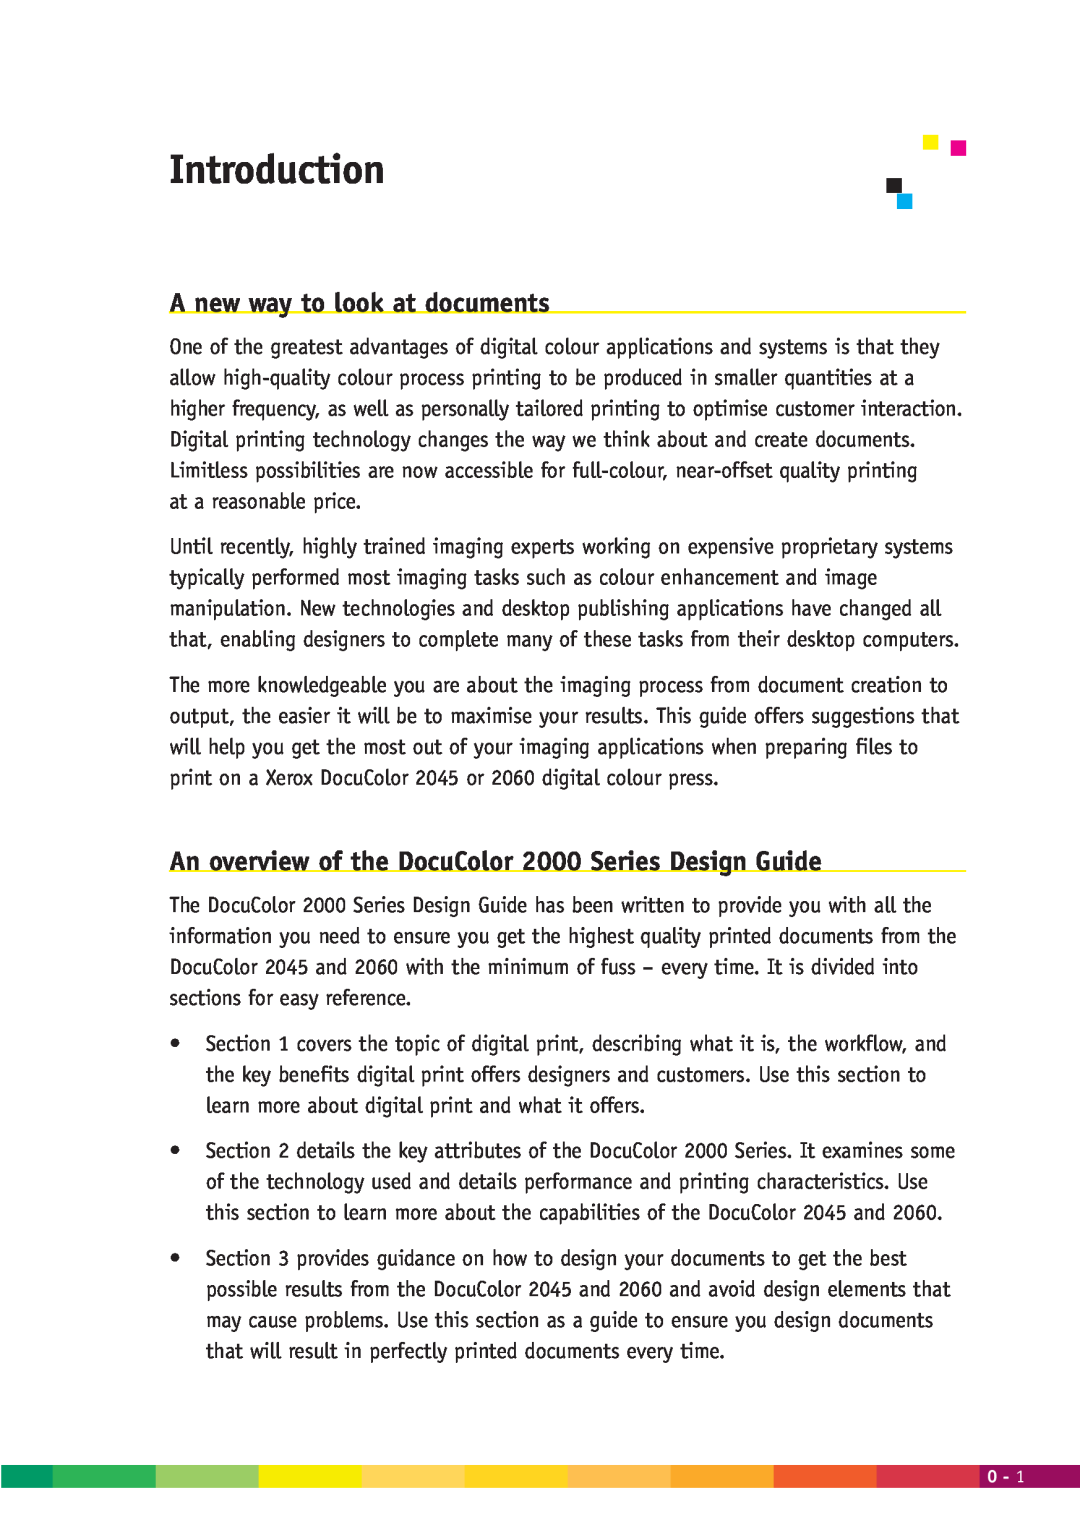 Xerox 2000 manual Introduction, A new way to look at documents 